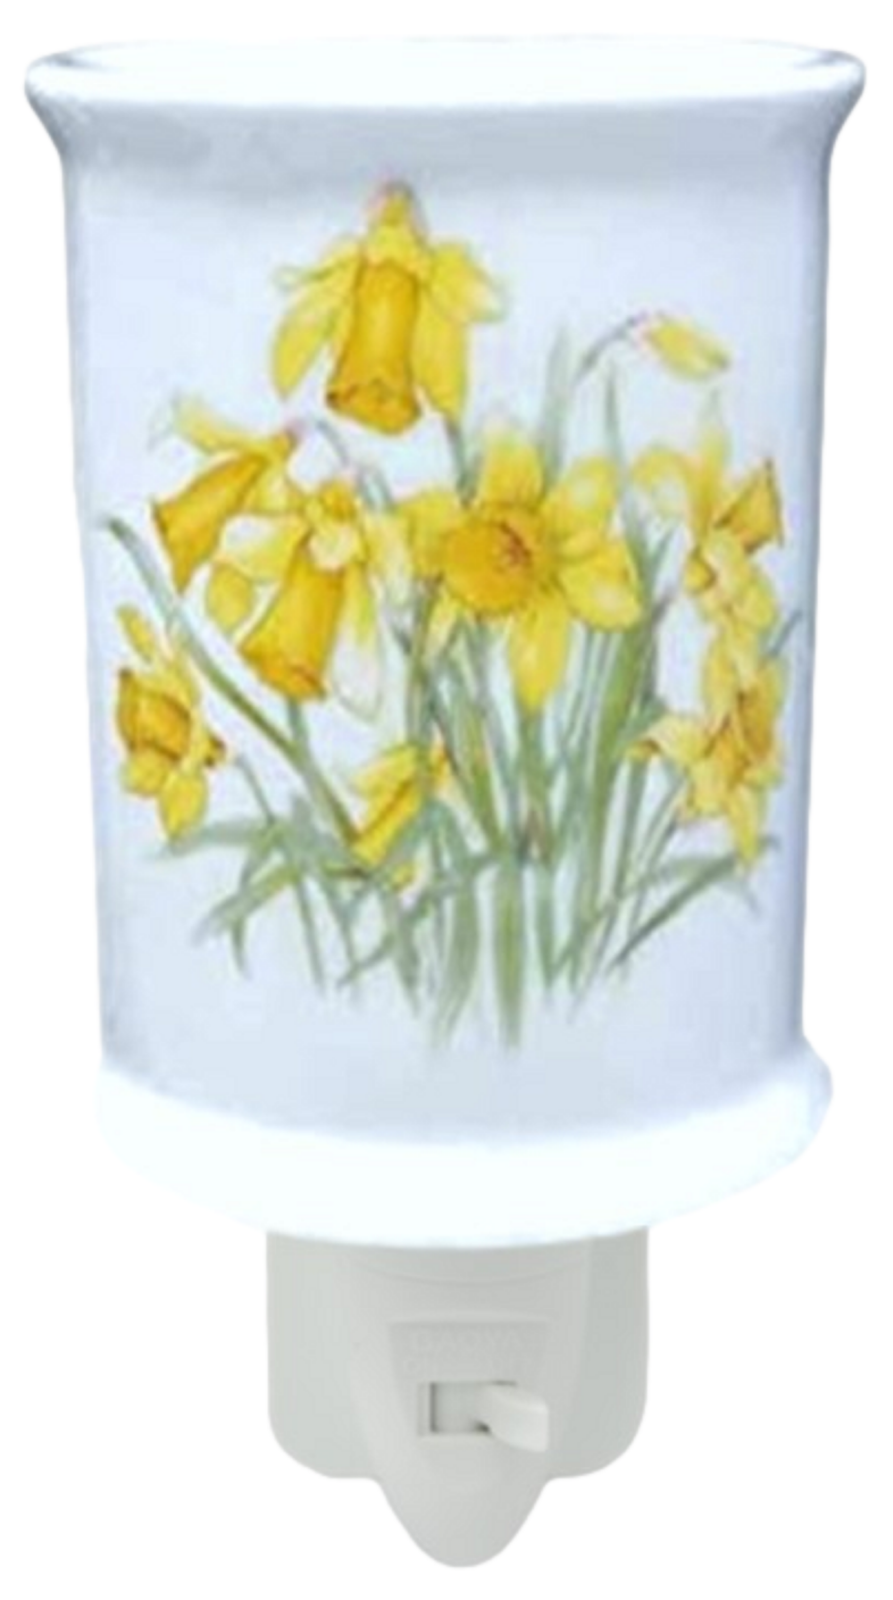 Ceramic Floral LED Night Light Electric Plug In On/Off Switch 6 Assorted Designs